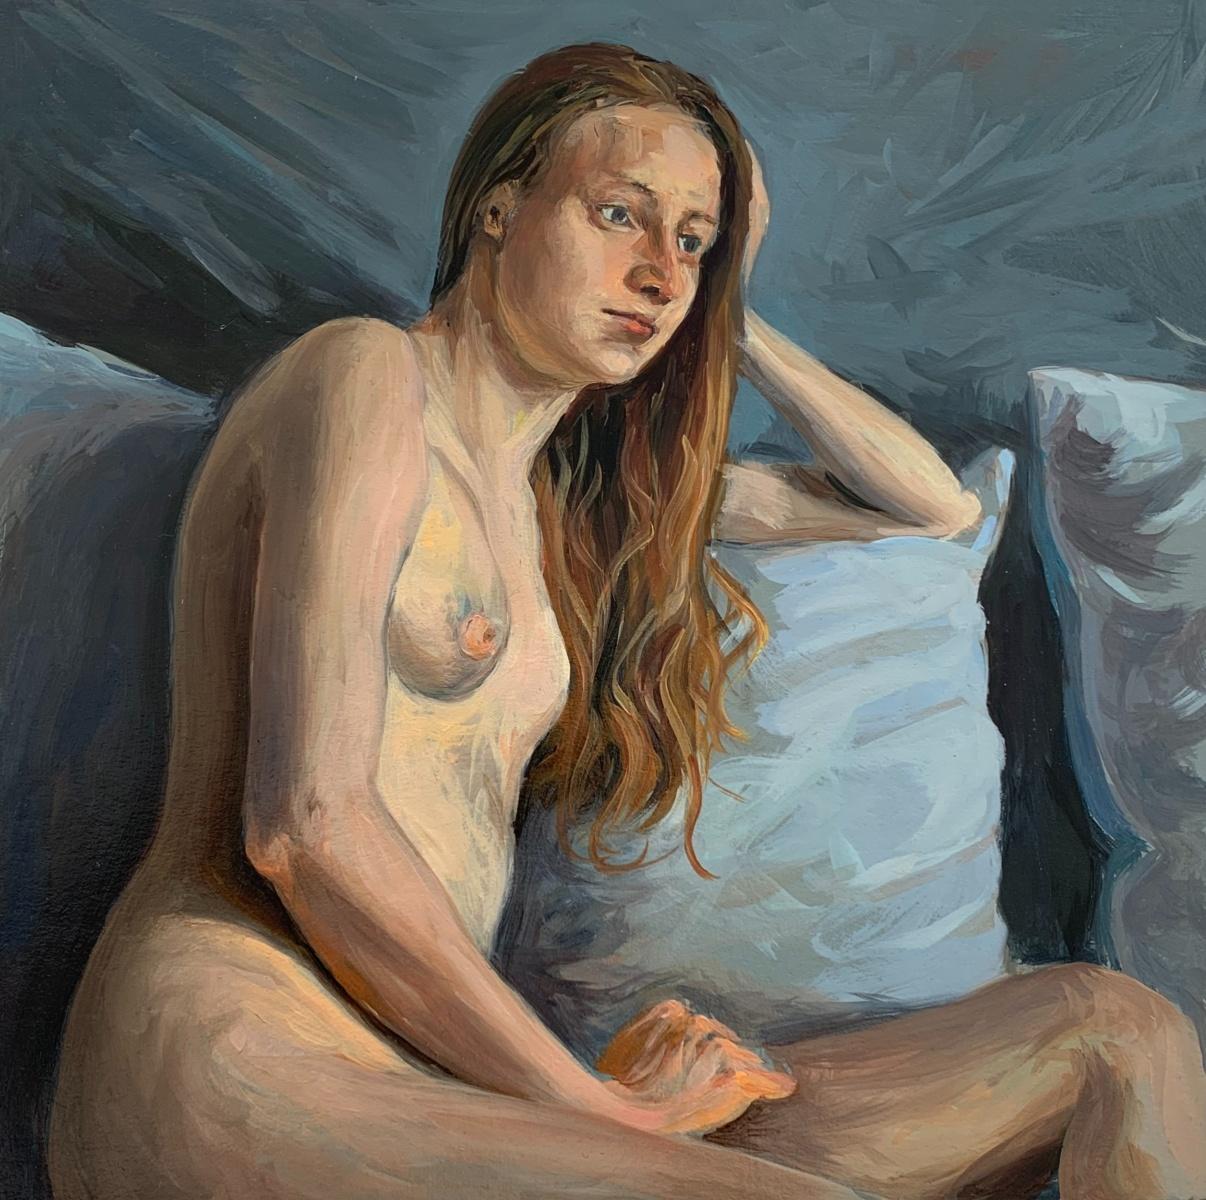 Agnieszka Staak-Janczarska Nude Painting - Nude with pillow - Realistic oil painting, Warm tones, Young Polish artist